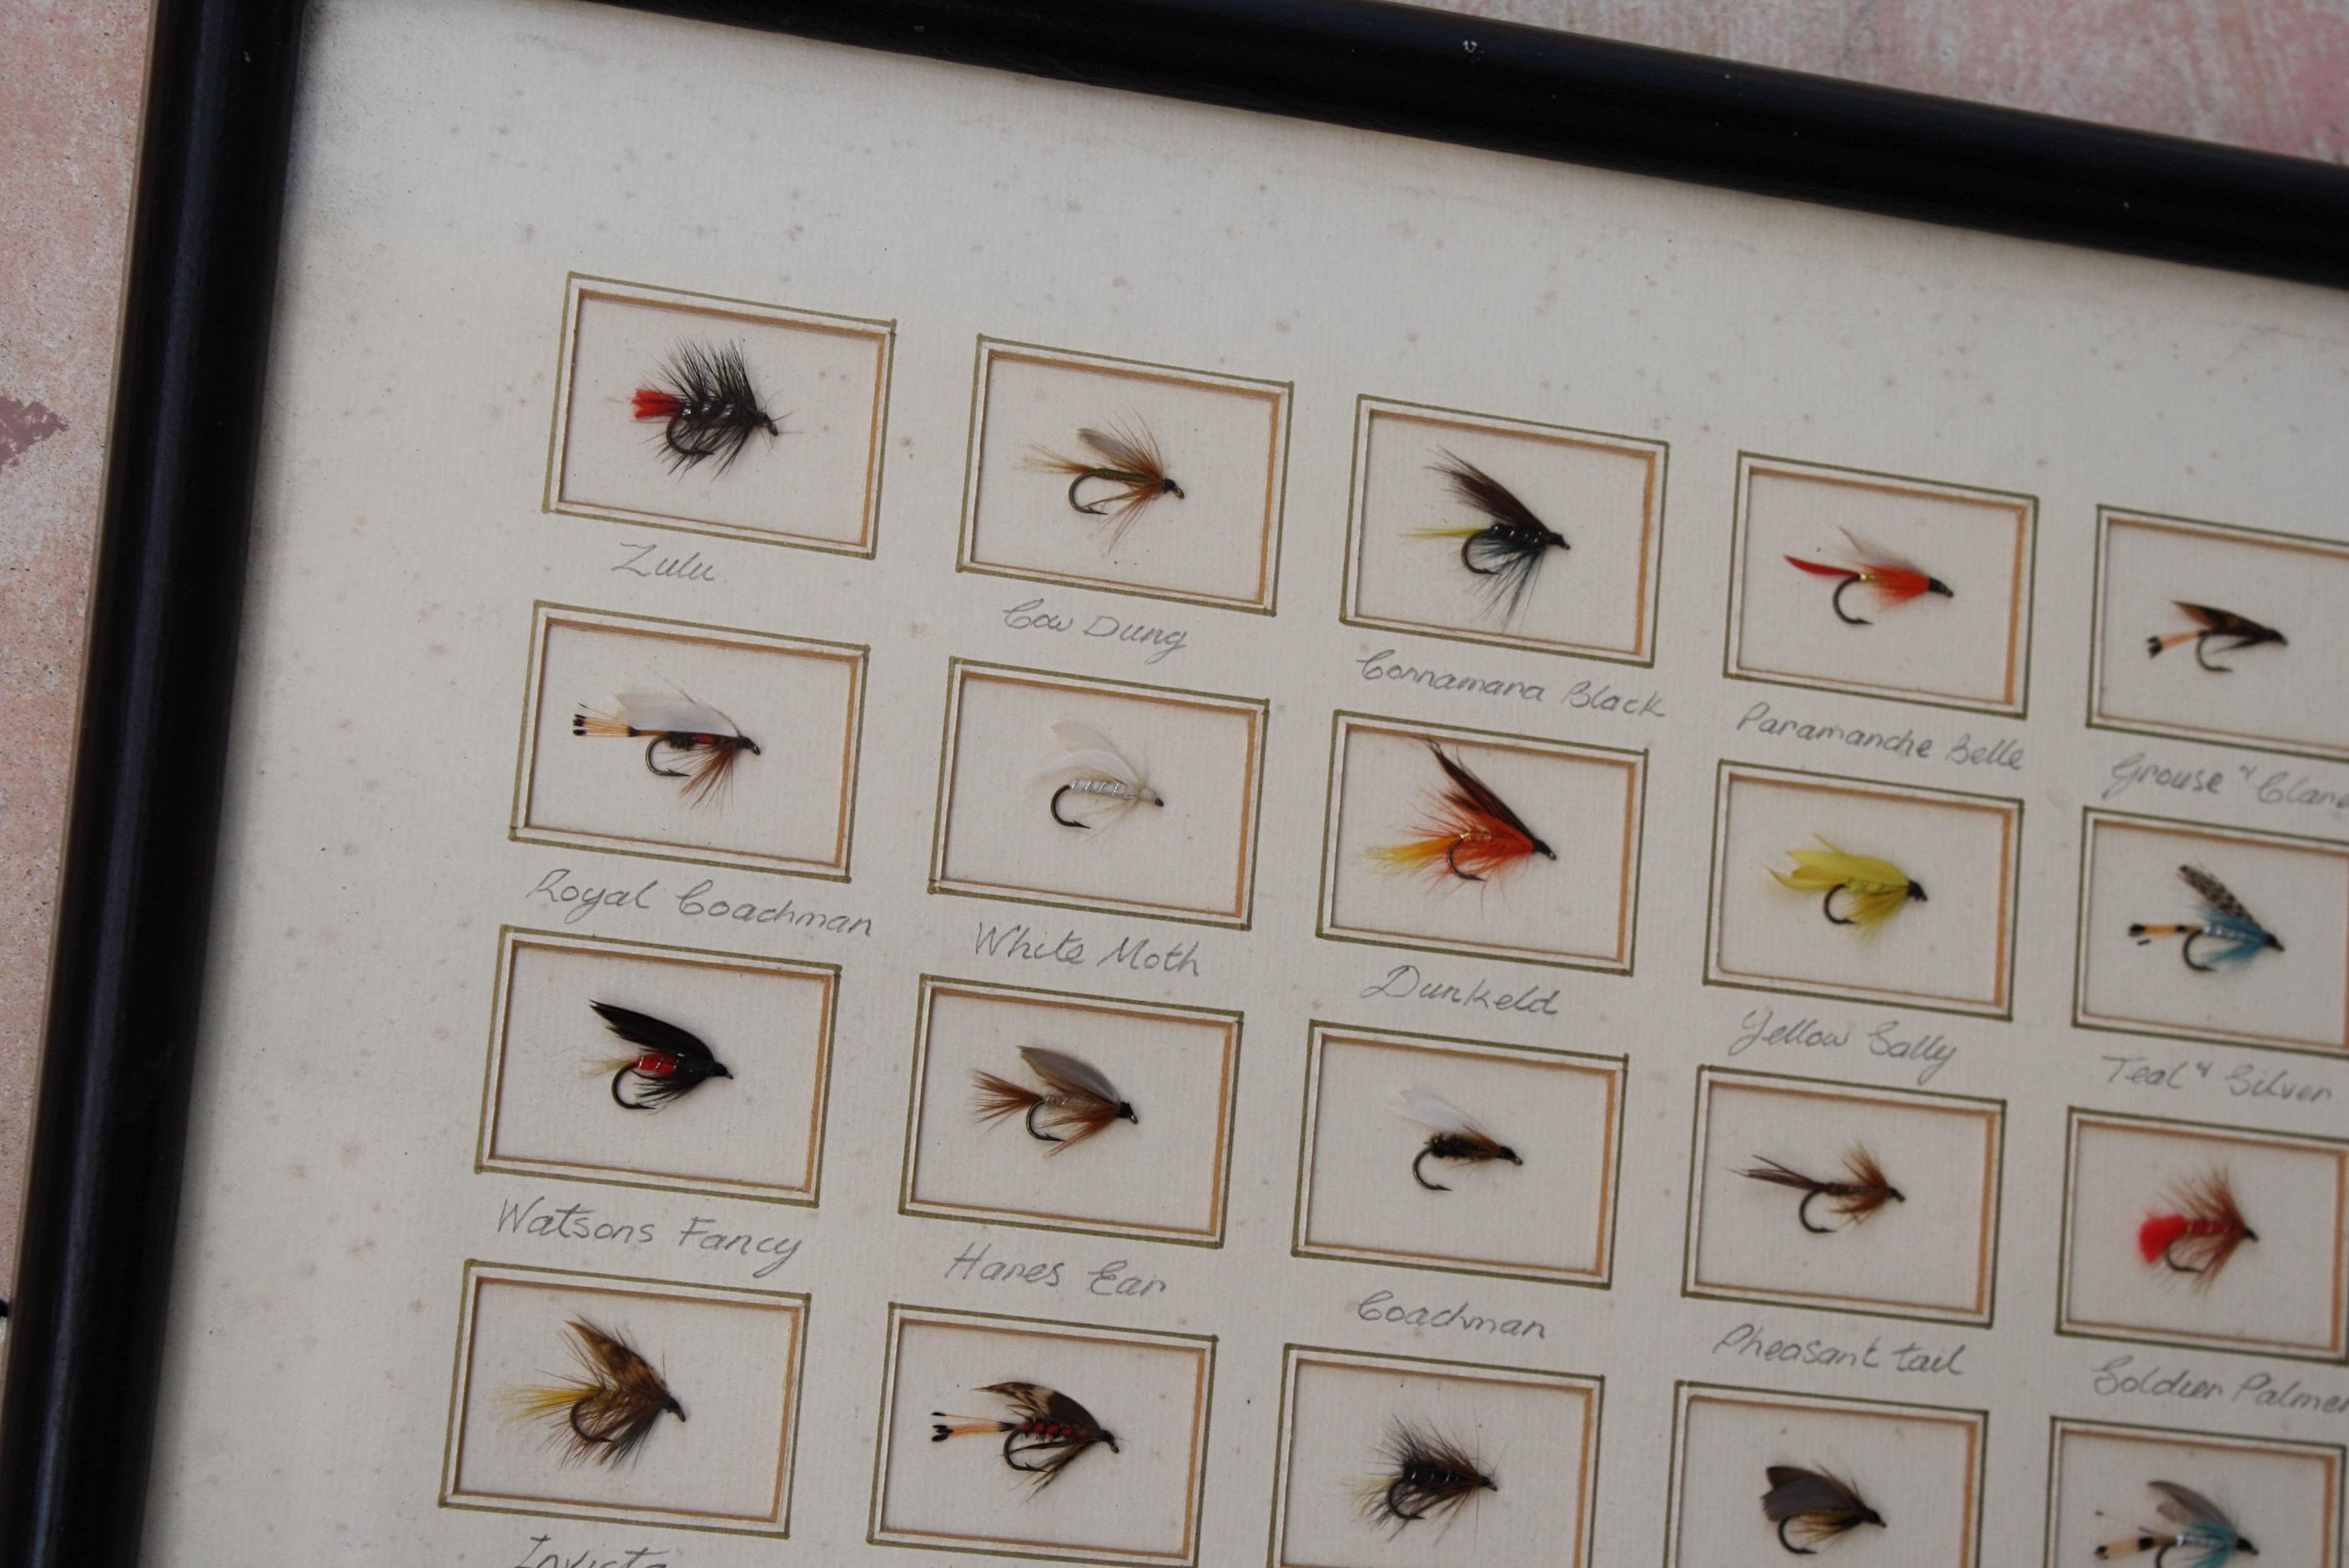 A decorative Edwardian trout fly display, possibly a sale sample for retail. Pleasingly mounted with pencilled names in a later ebonised bullnose frame.

Areas of pitting, and discolouration to the mount boards, the flies are still vibrant in